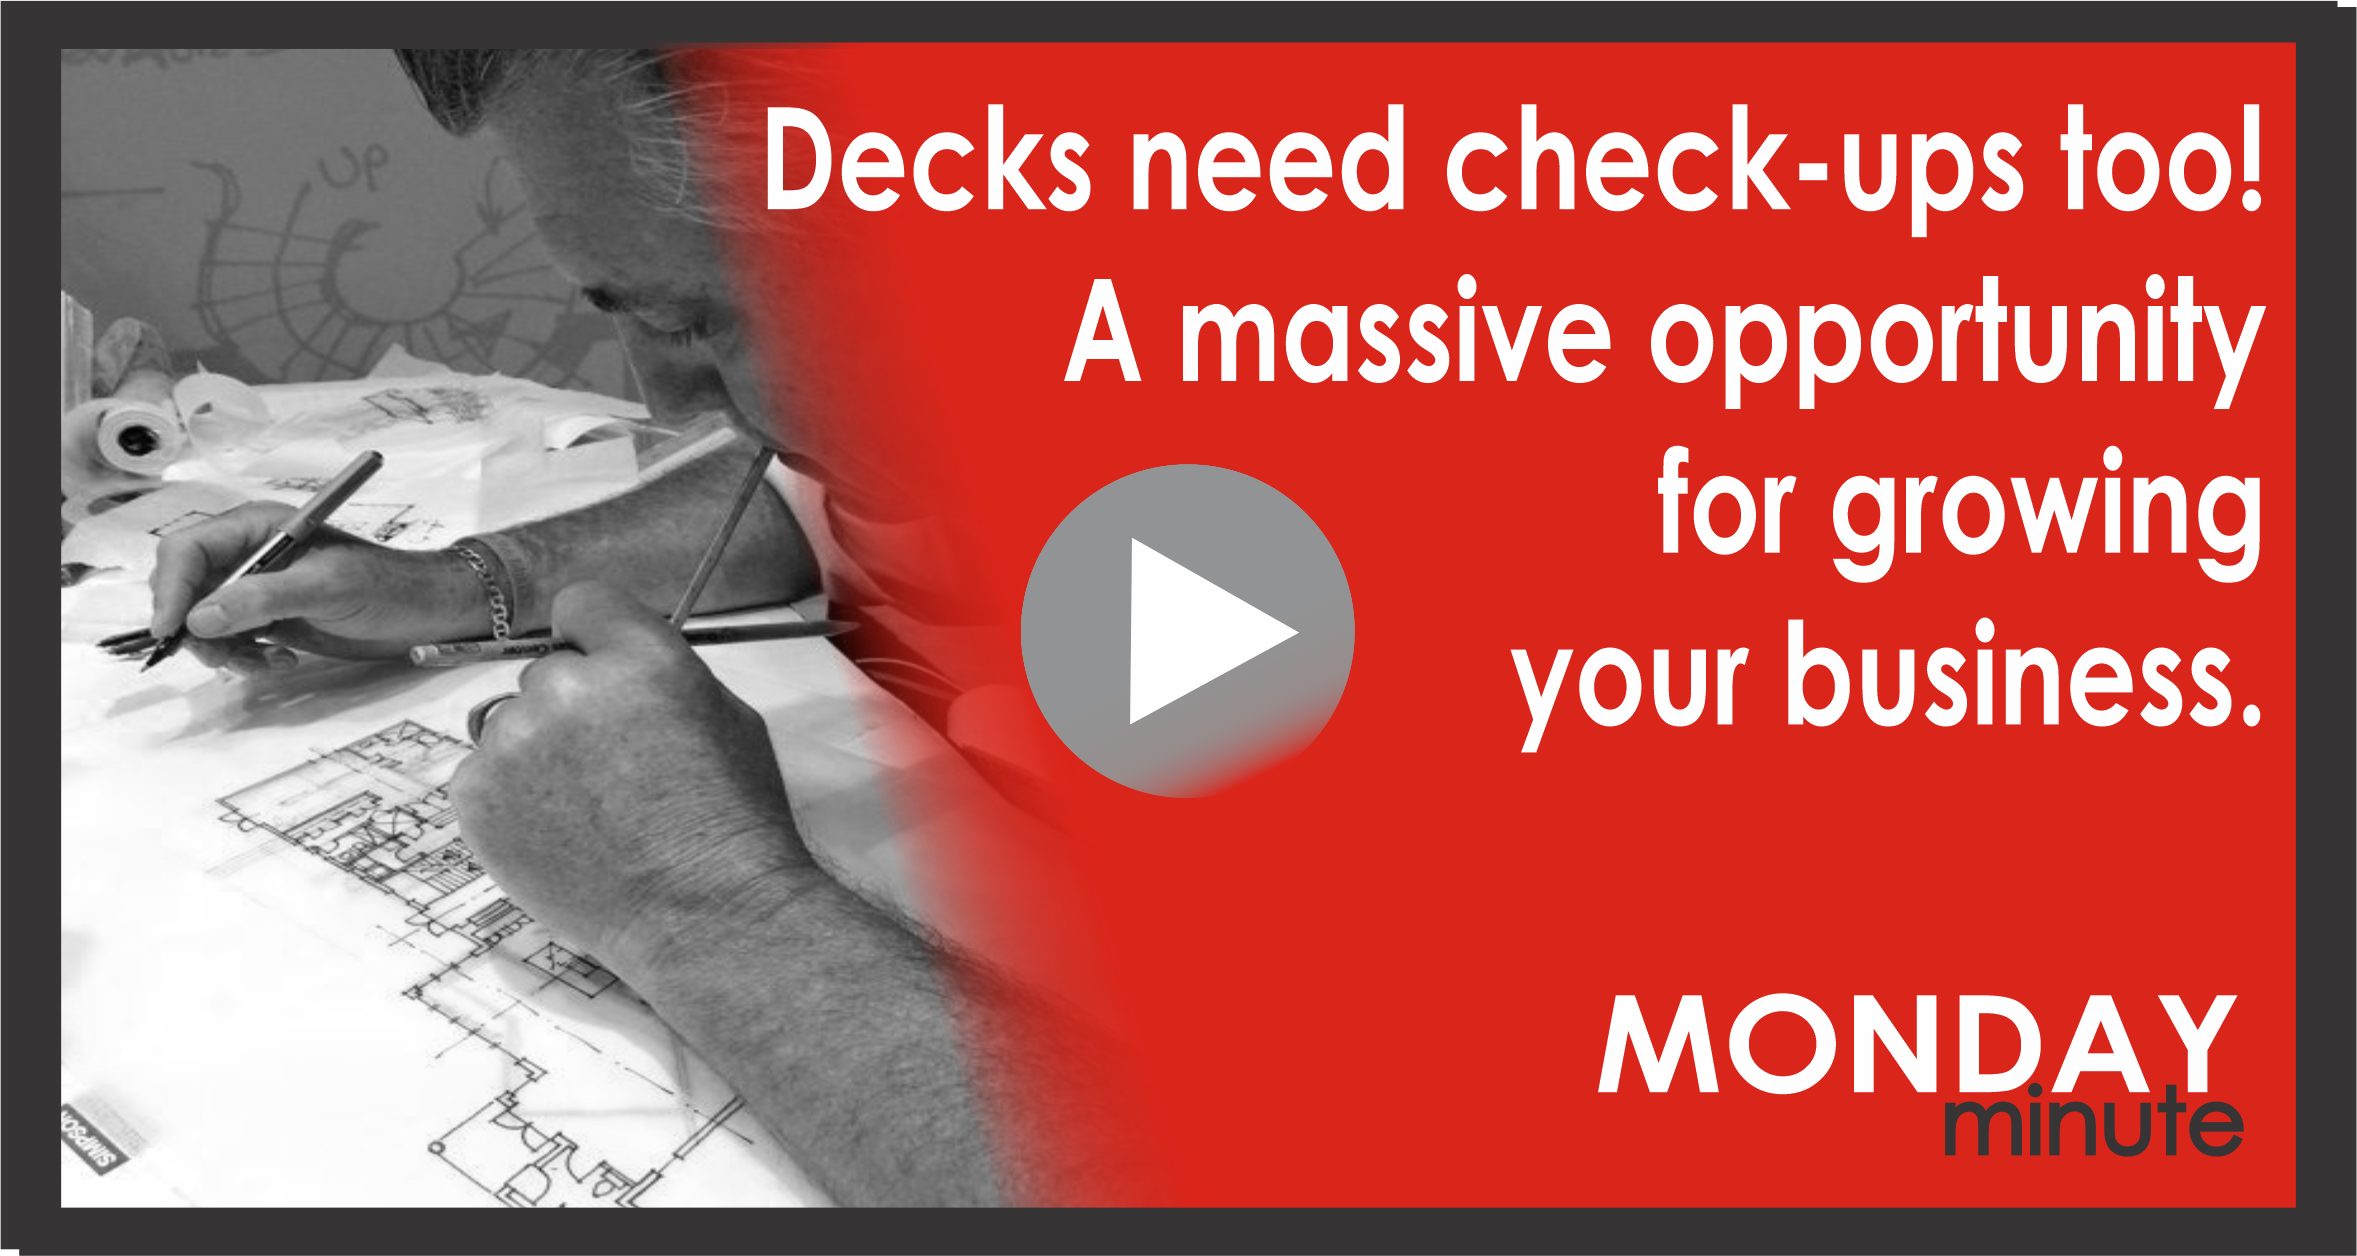 Decks need check-ups too! A Massive opportunity for growing your business.